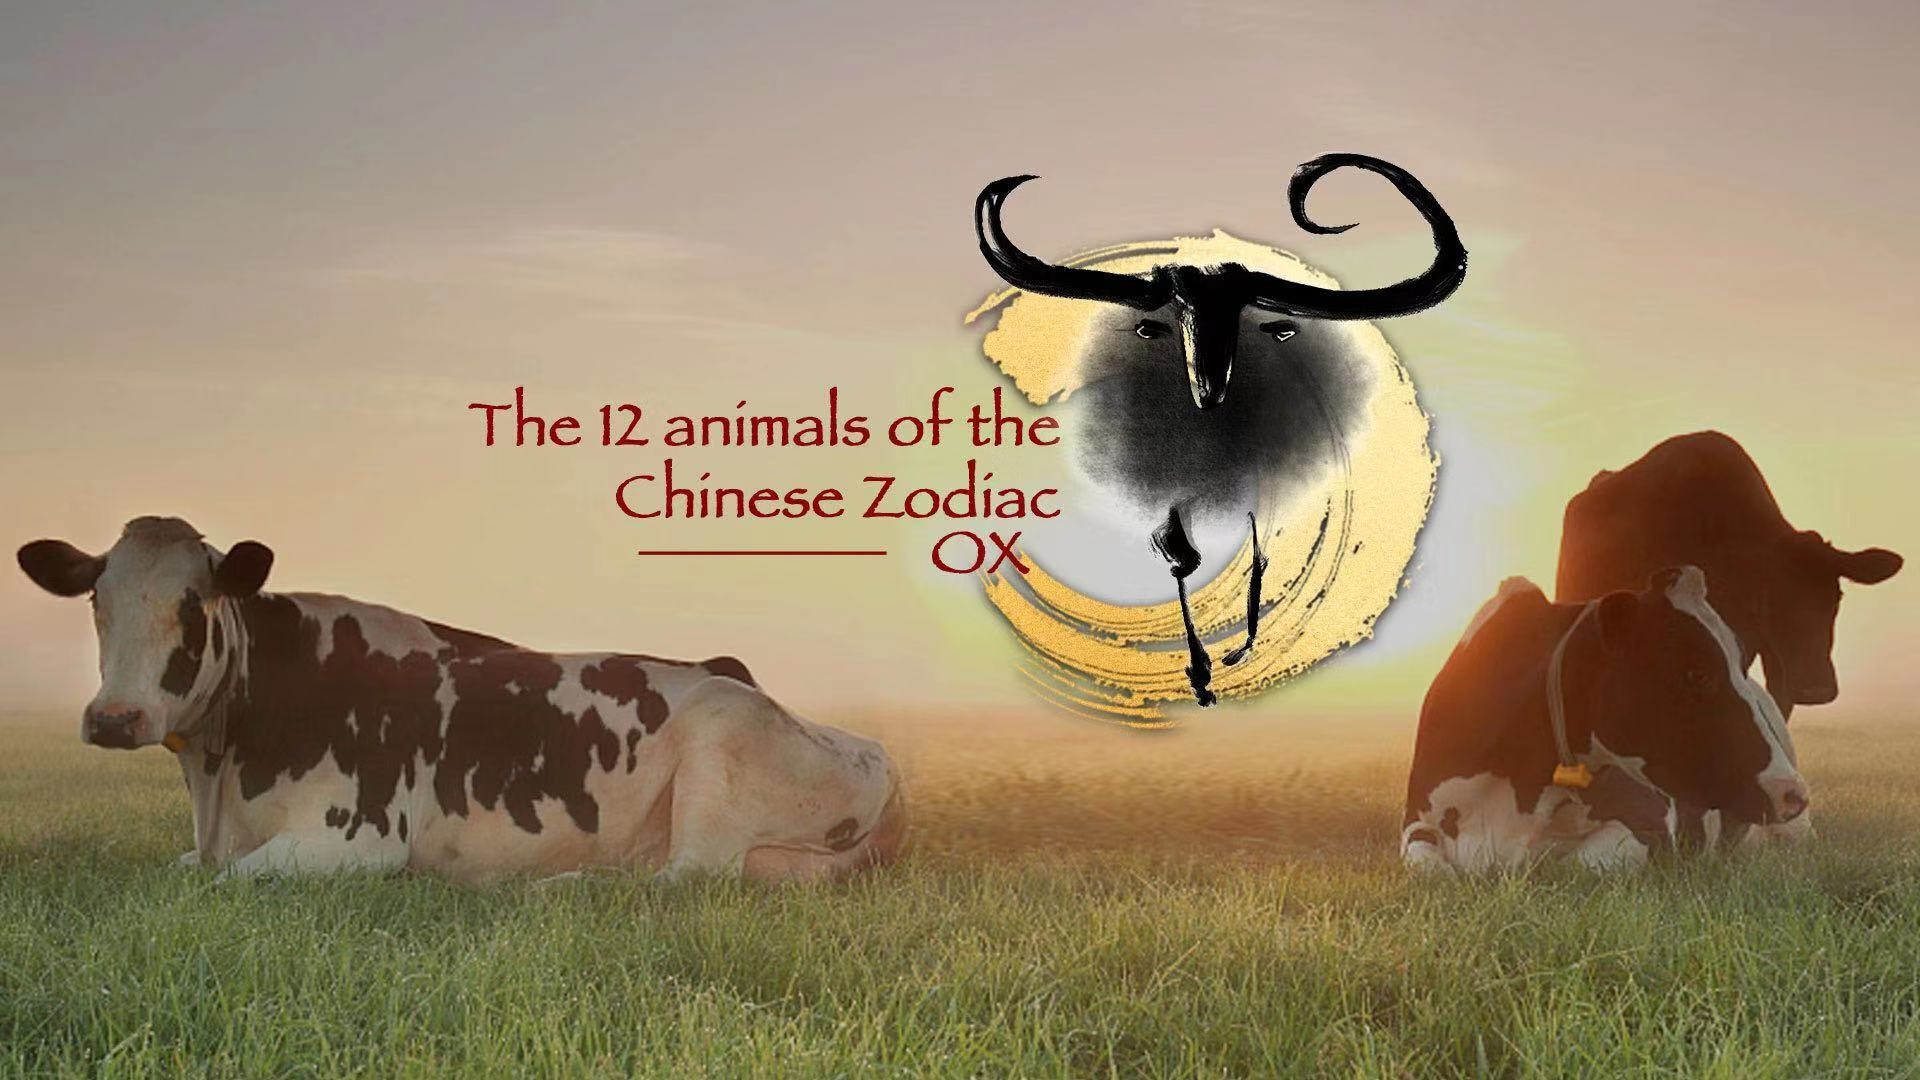 The 12 animals of the Chinese Zodiac: Ox - CGTN